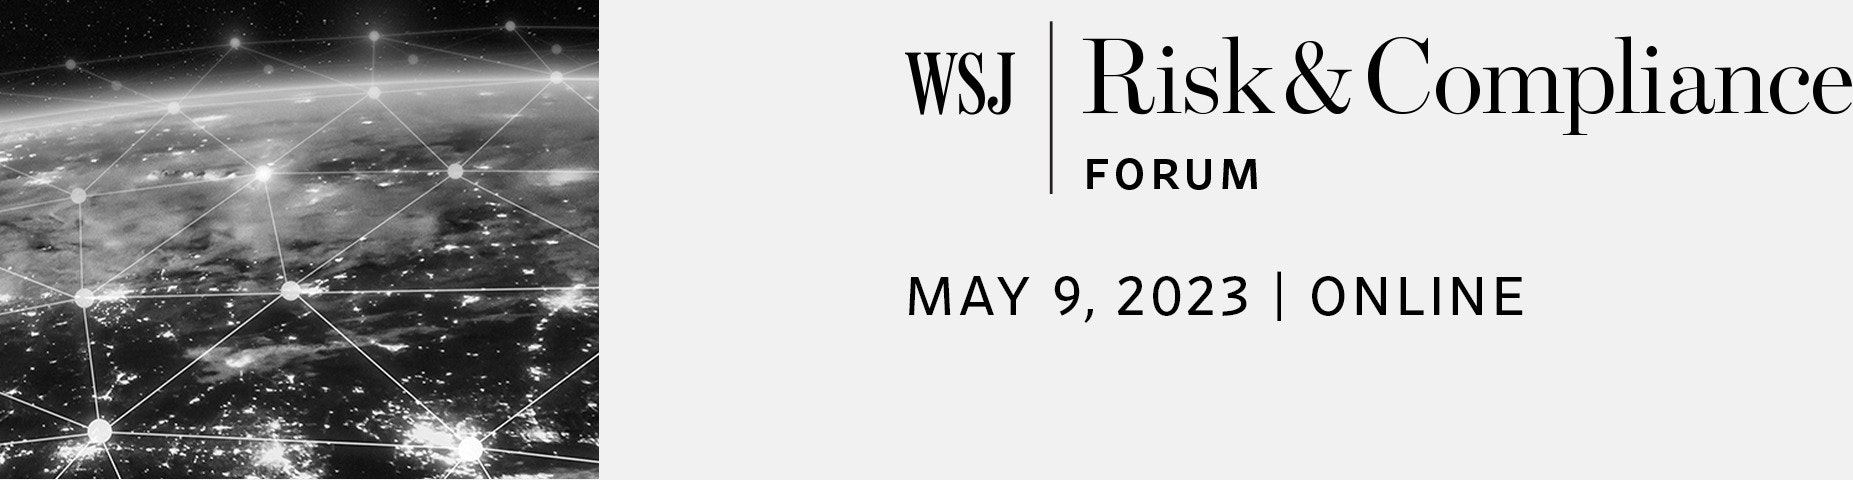 Cover image of WSJ Risk & Compliance Forum